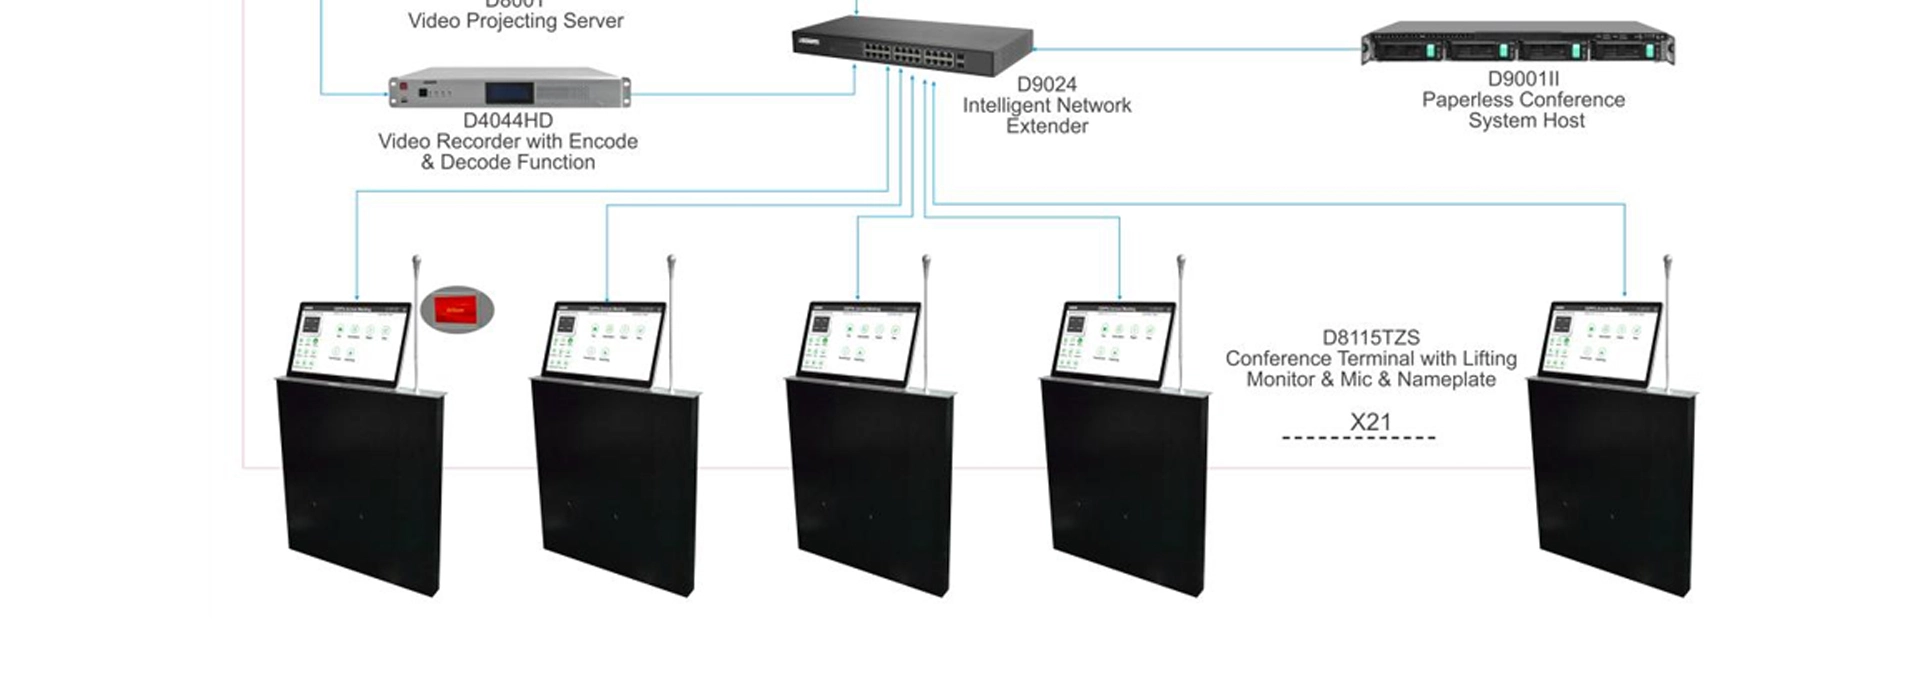 Paperless Conference System Document Server